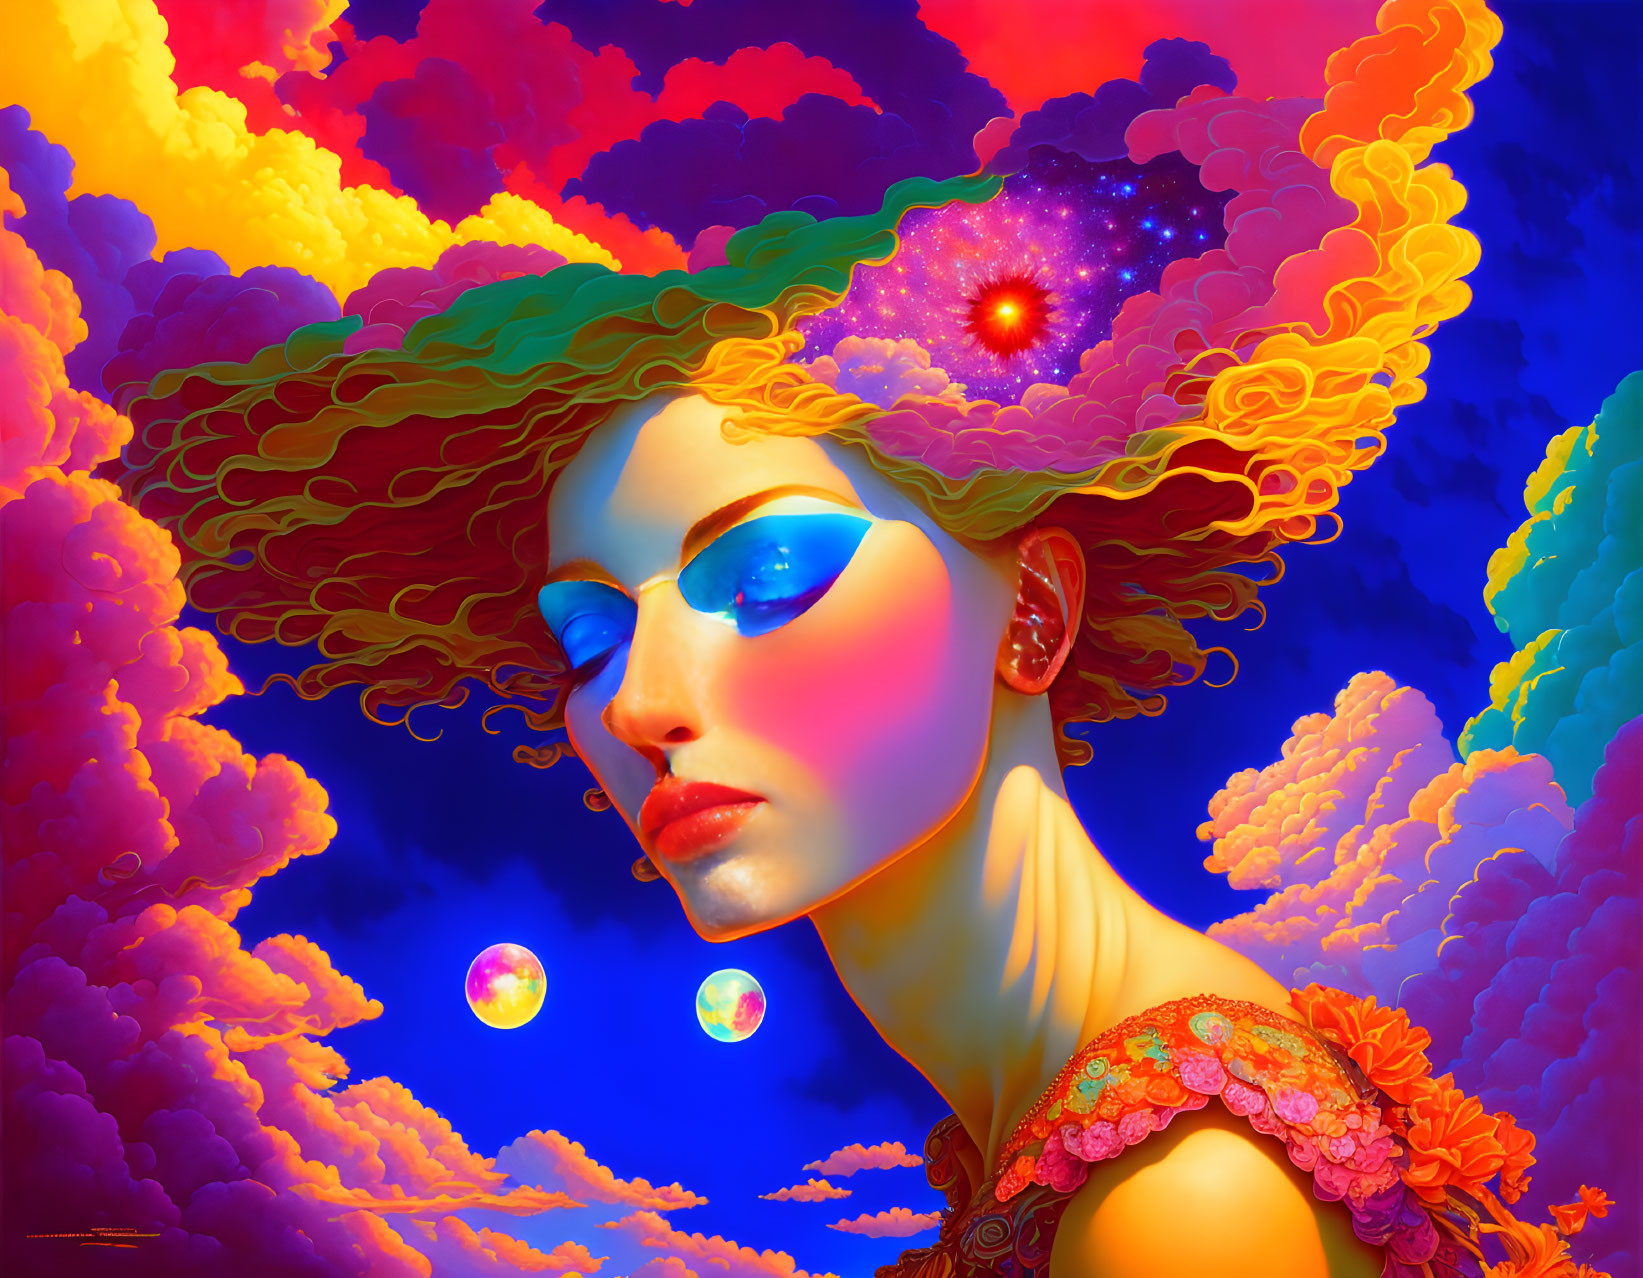 Colorful Artwork of Woman with Cloud Hair and Celestial Background